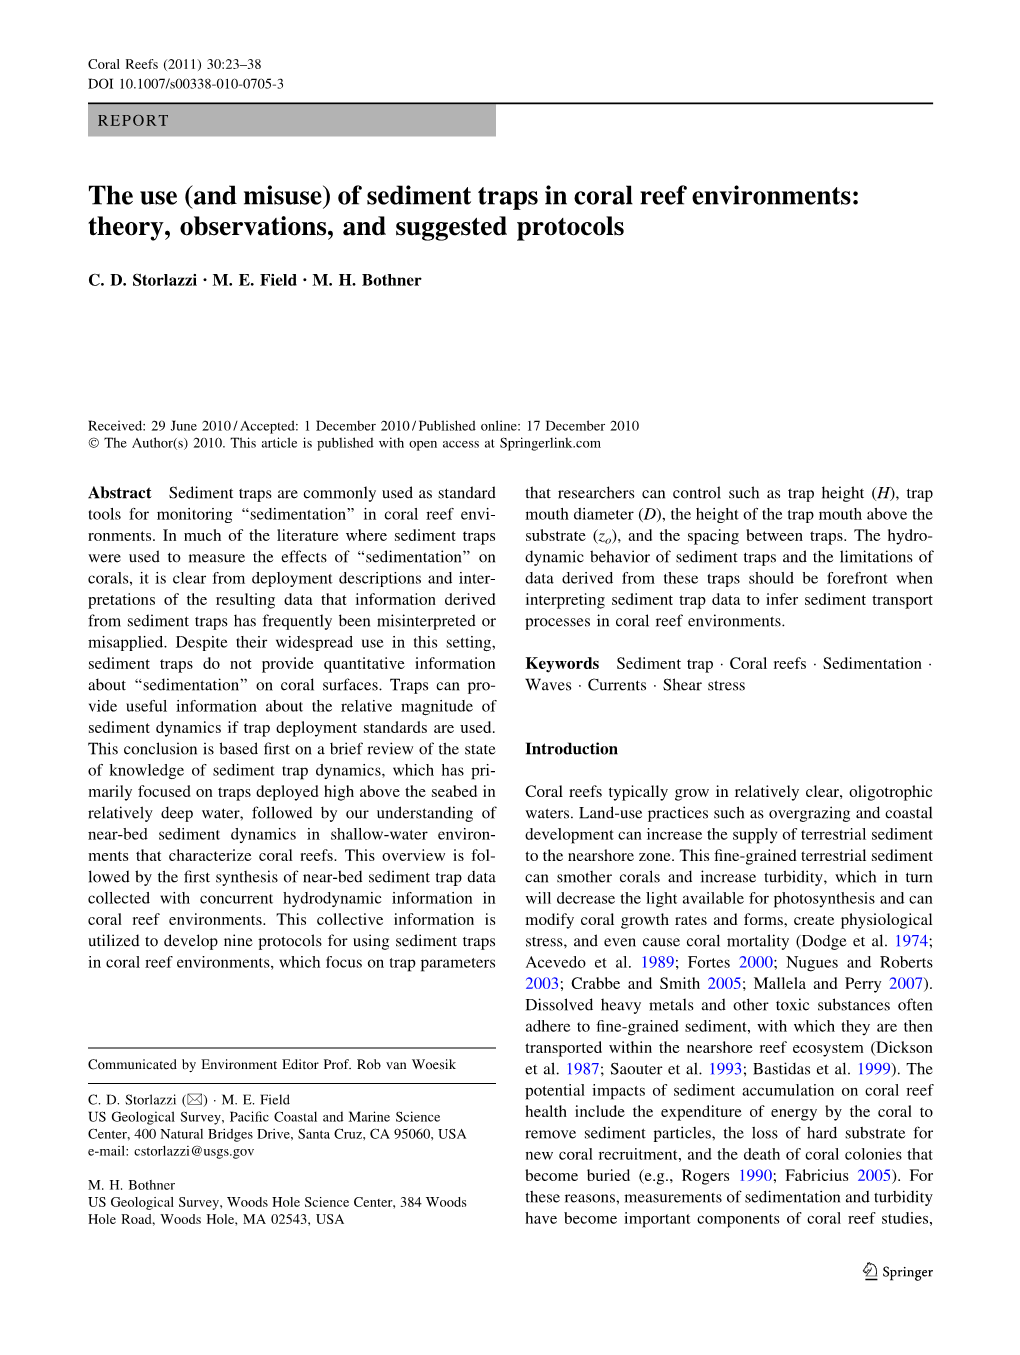 The Use (And Misuse) of Sediment Traps in Coral Reef Environments: Theory, Observations, and Suggested Protocols